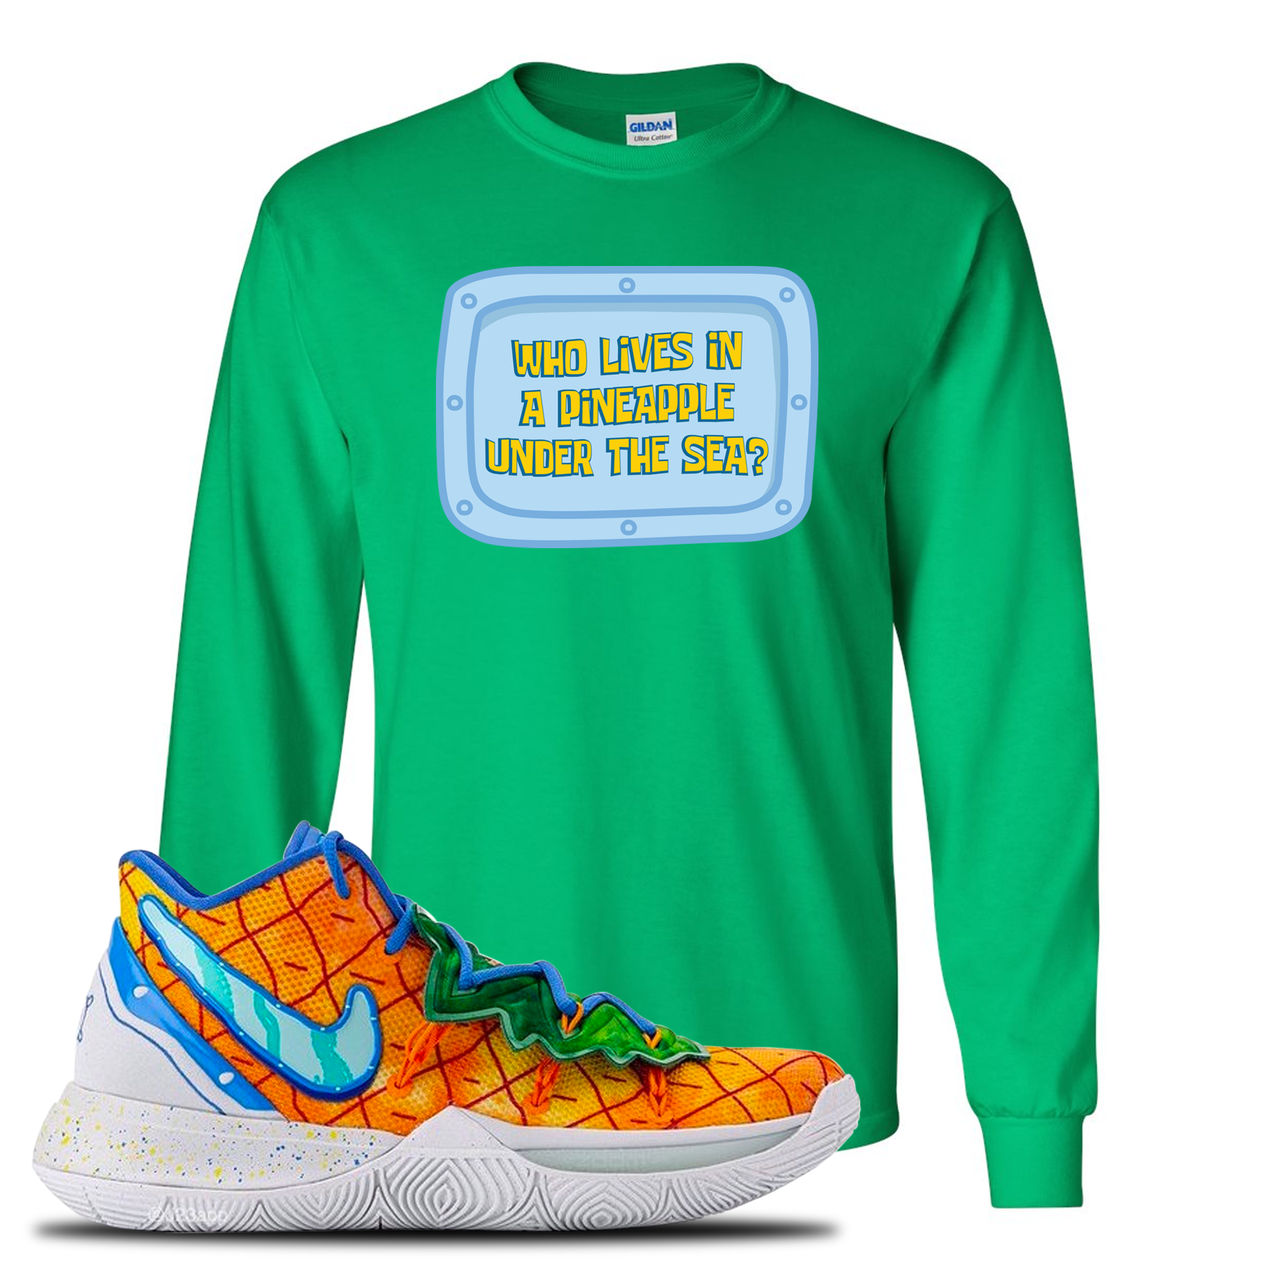 Kyrie 5 Pineapple House Who Lives in a Pineapple Under the Sea? Irish Green Sneaker Hook Up Longsleeve T-Shirt